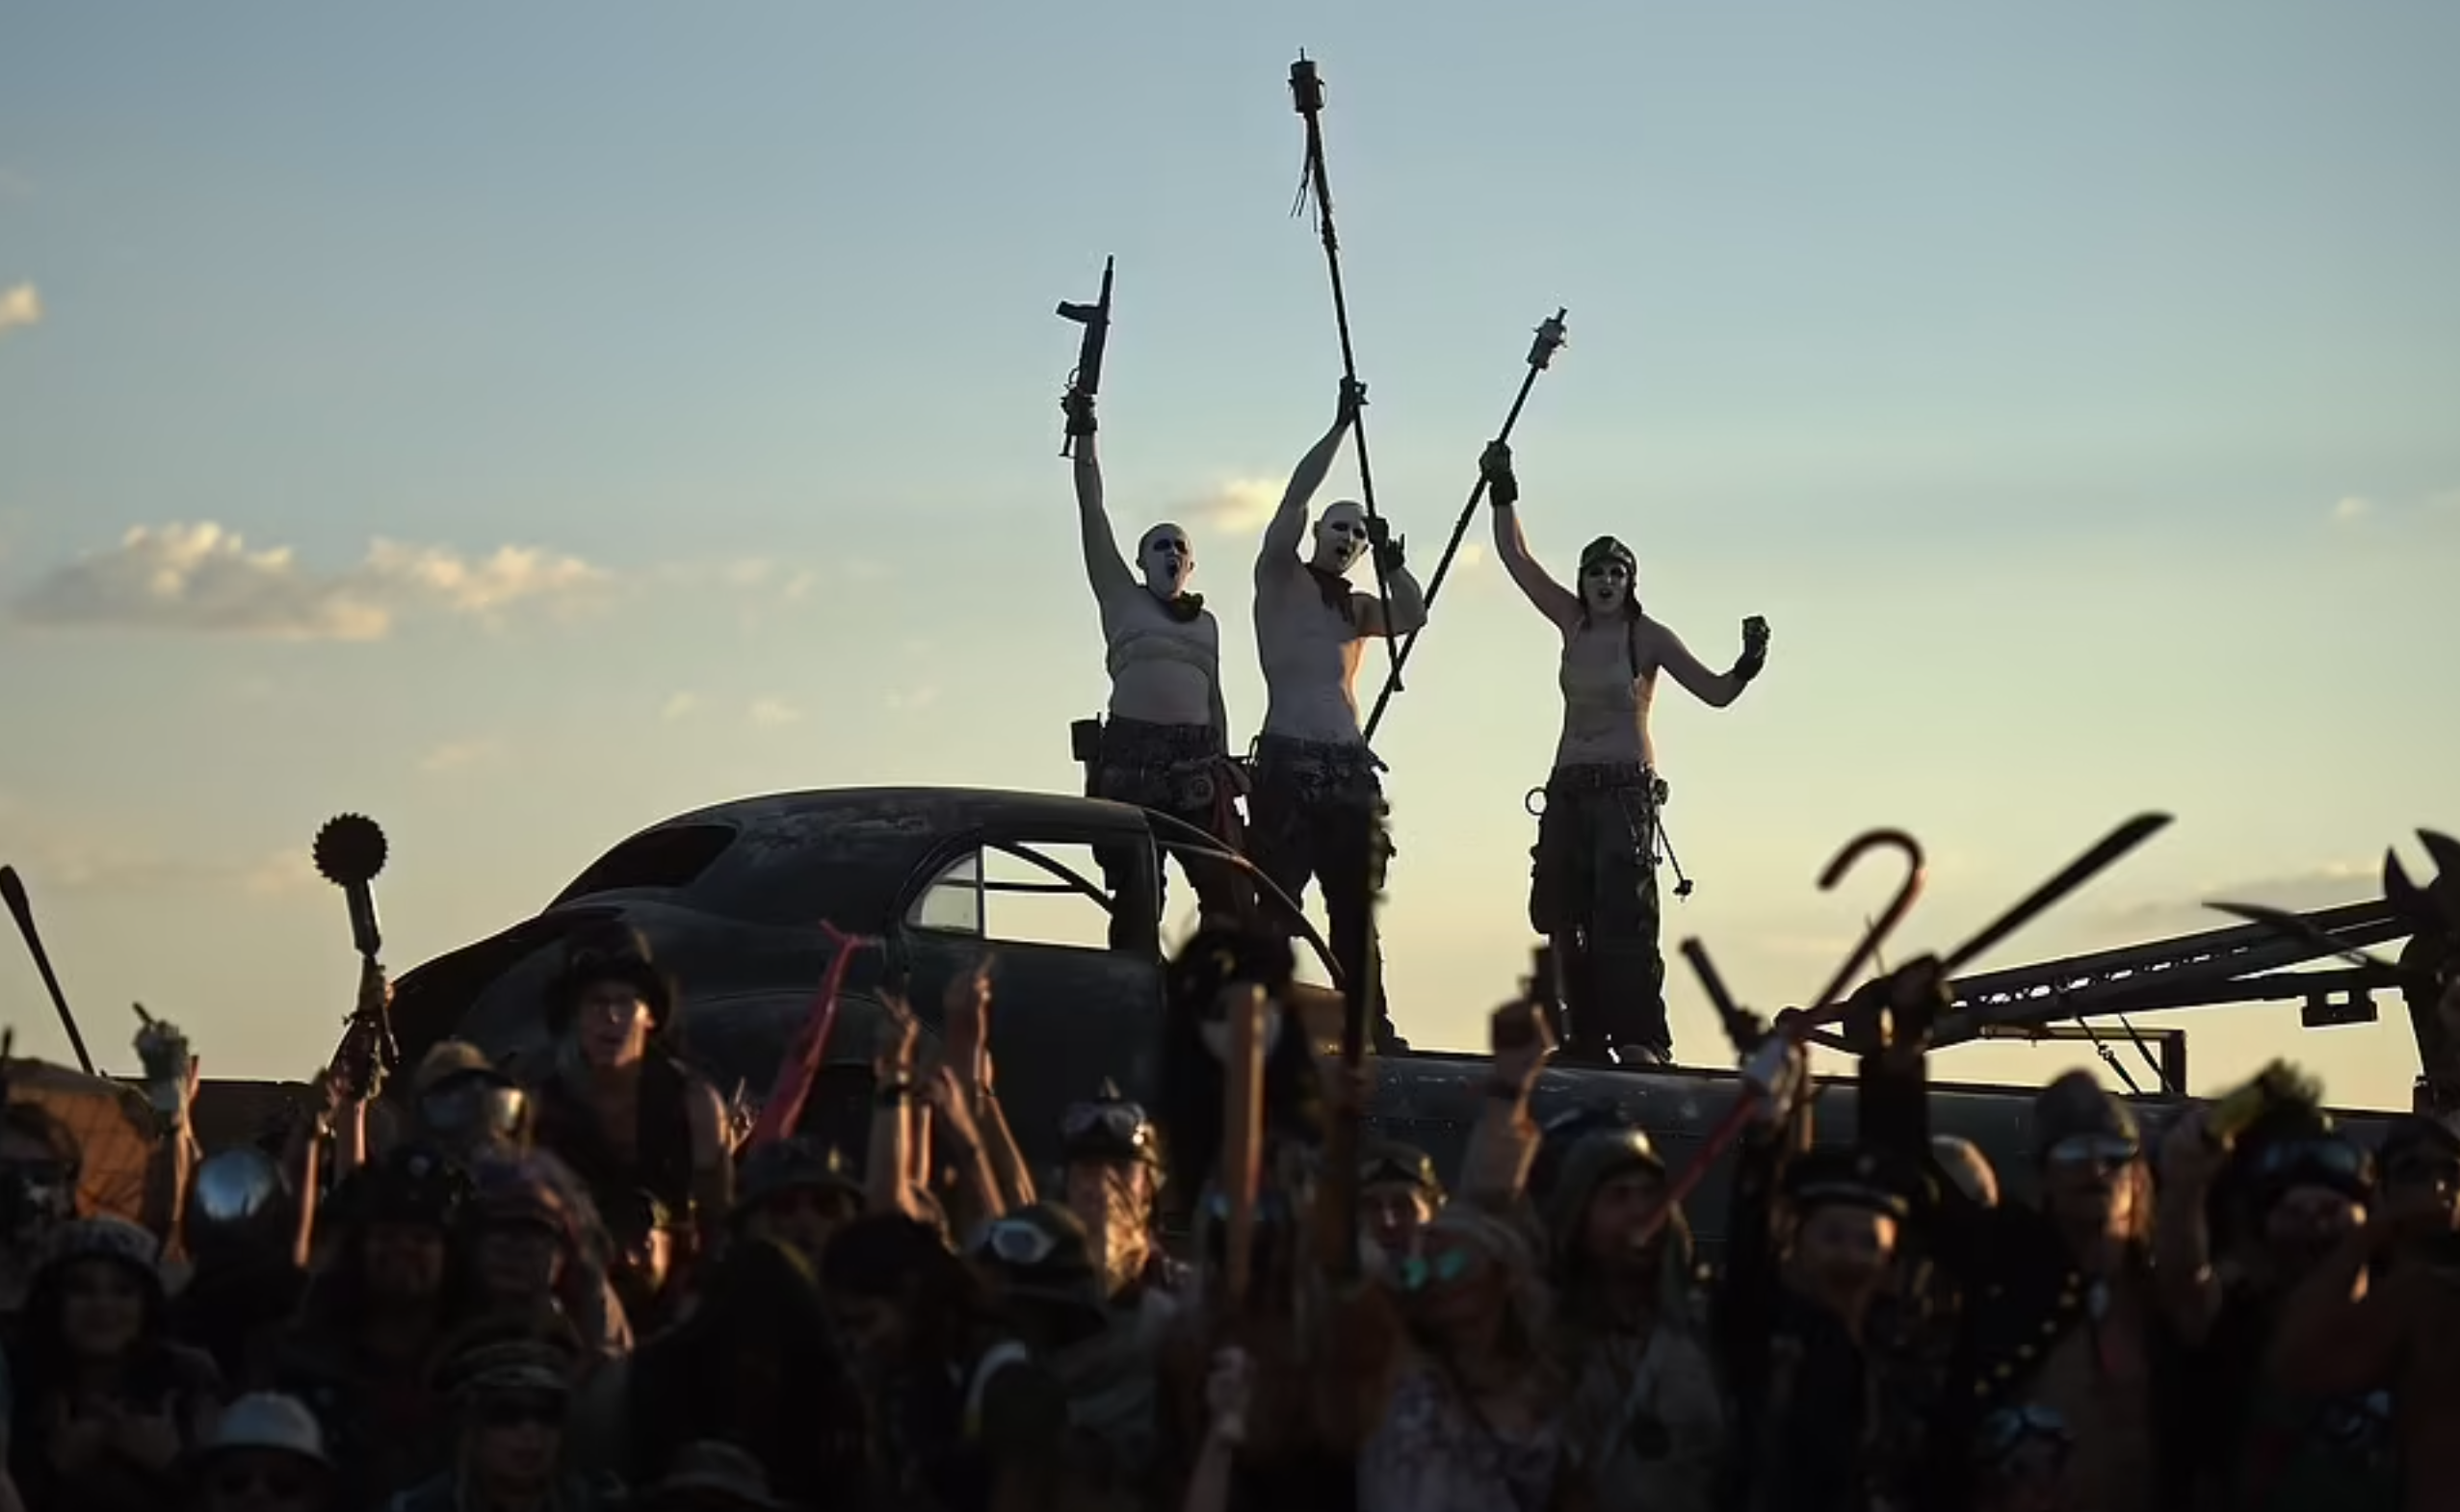 pictures from wasteland weekend - - crowd of people on top of a car